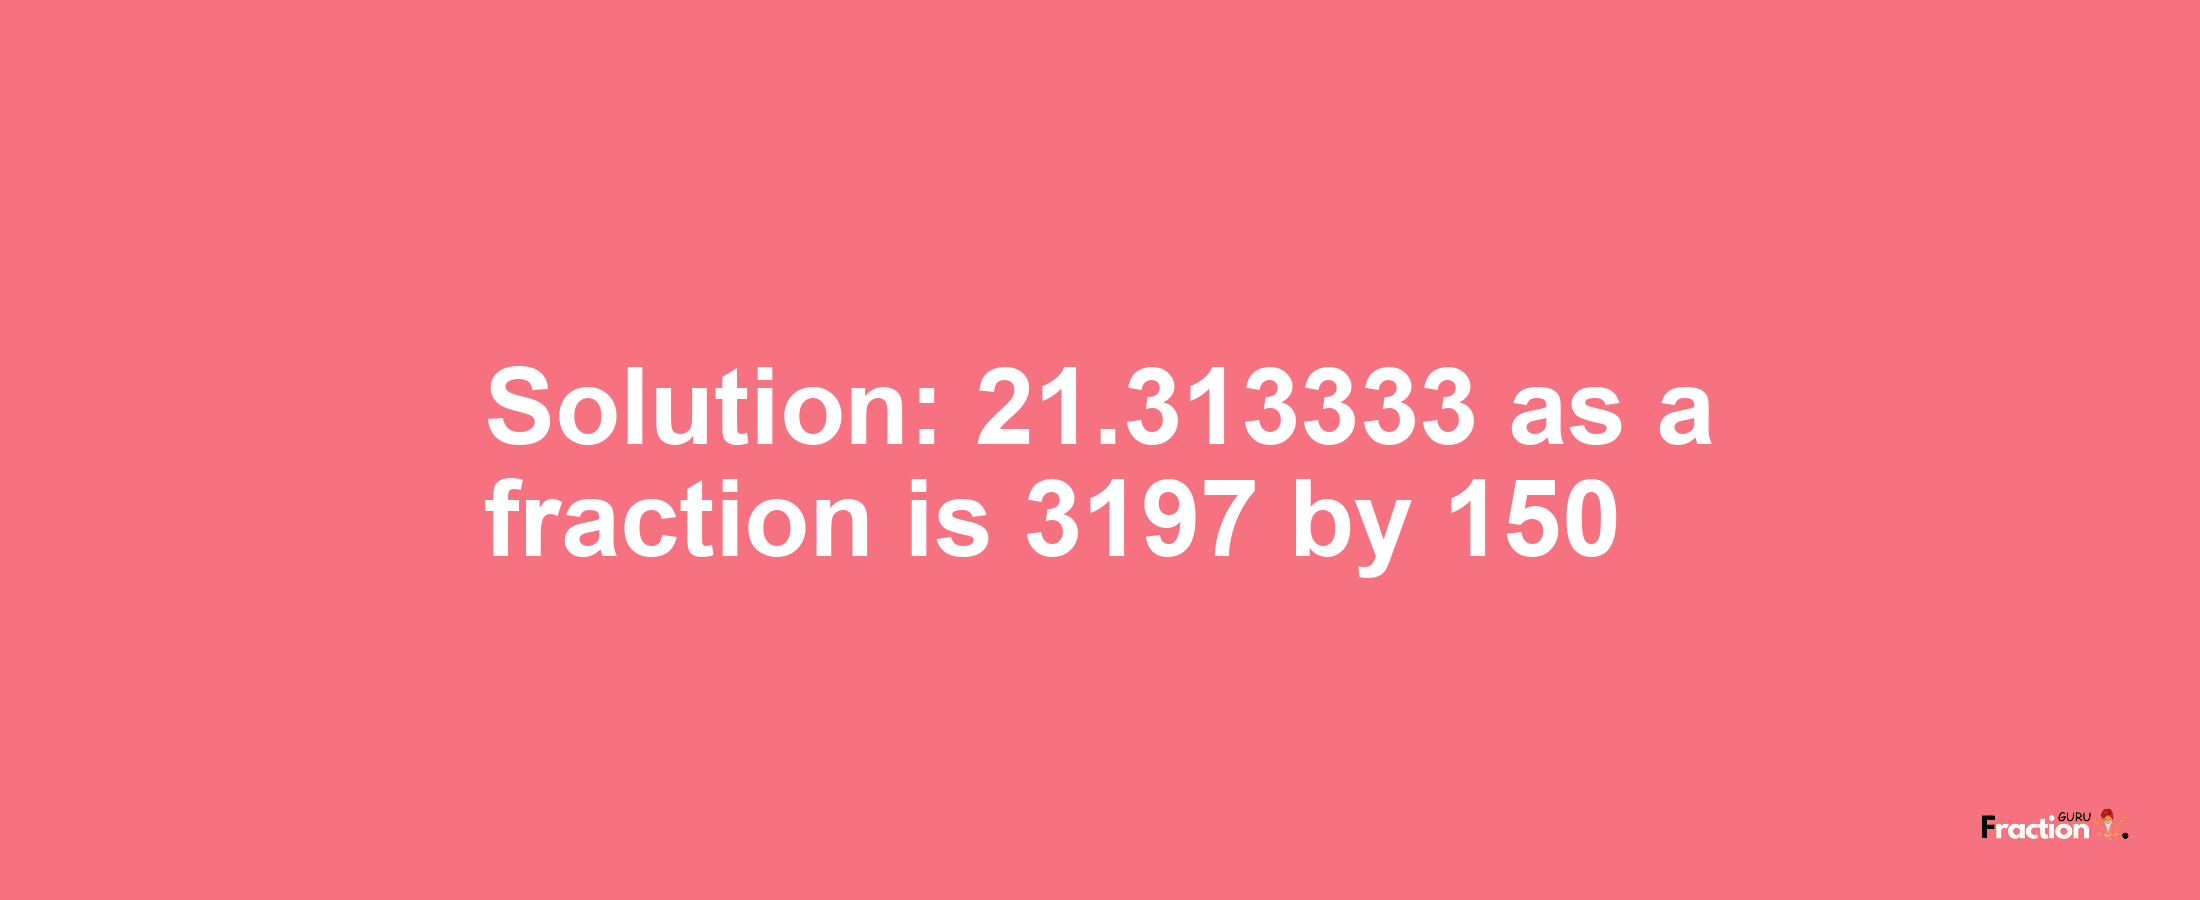 Solution:21.313333 as a fraction is 3197/150